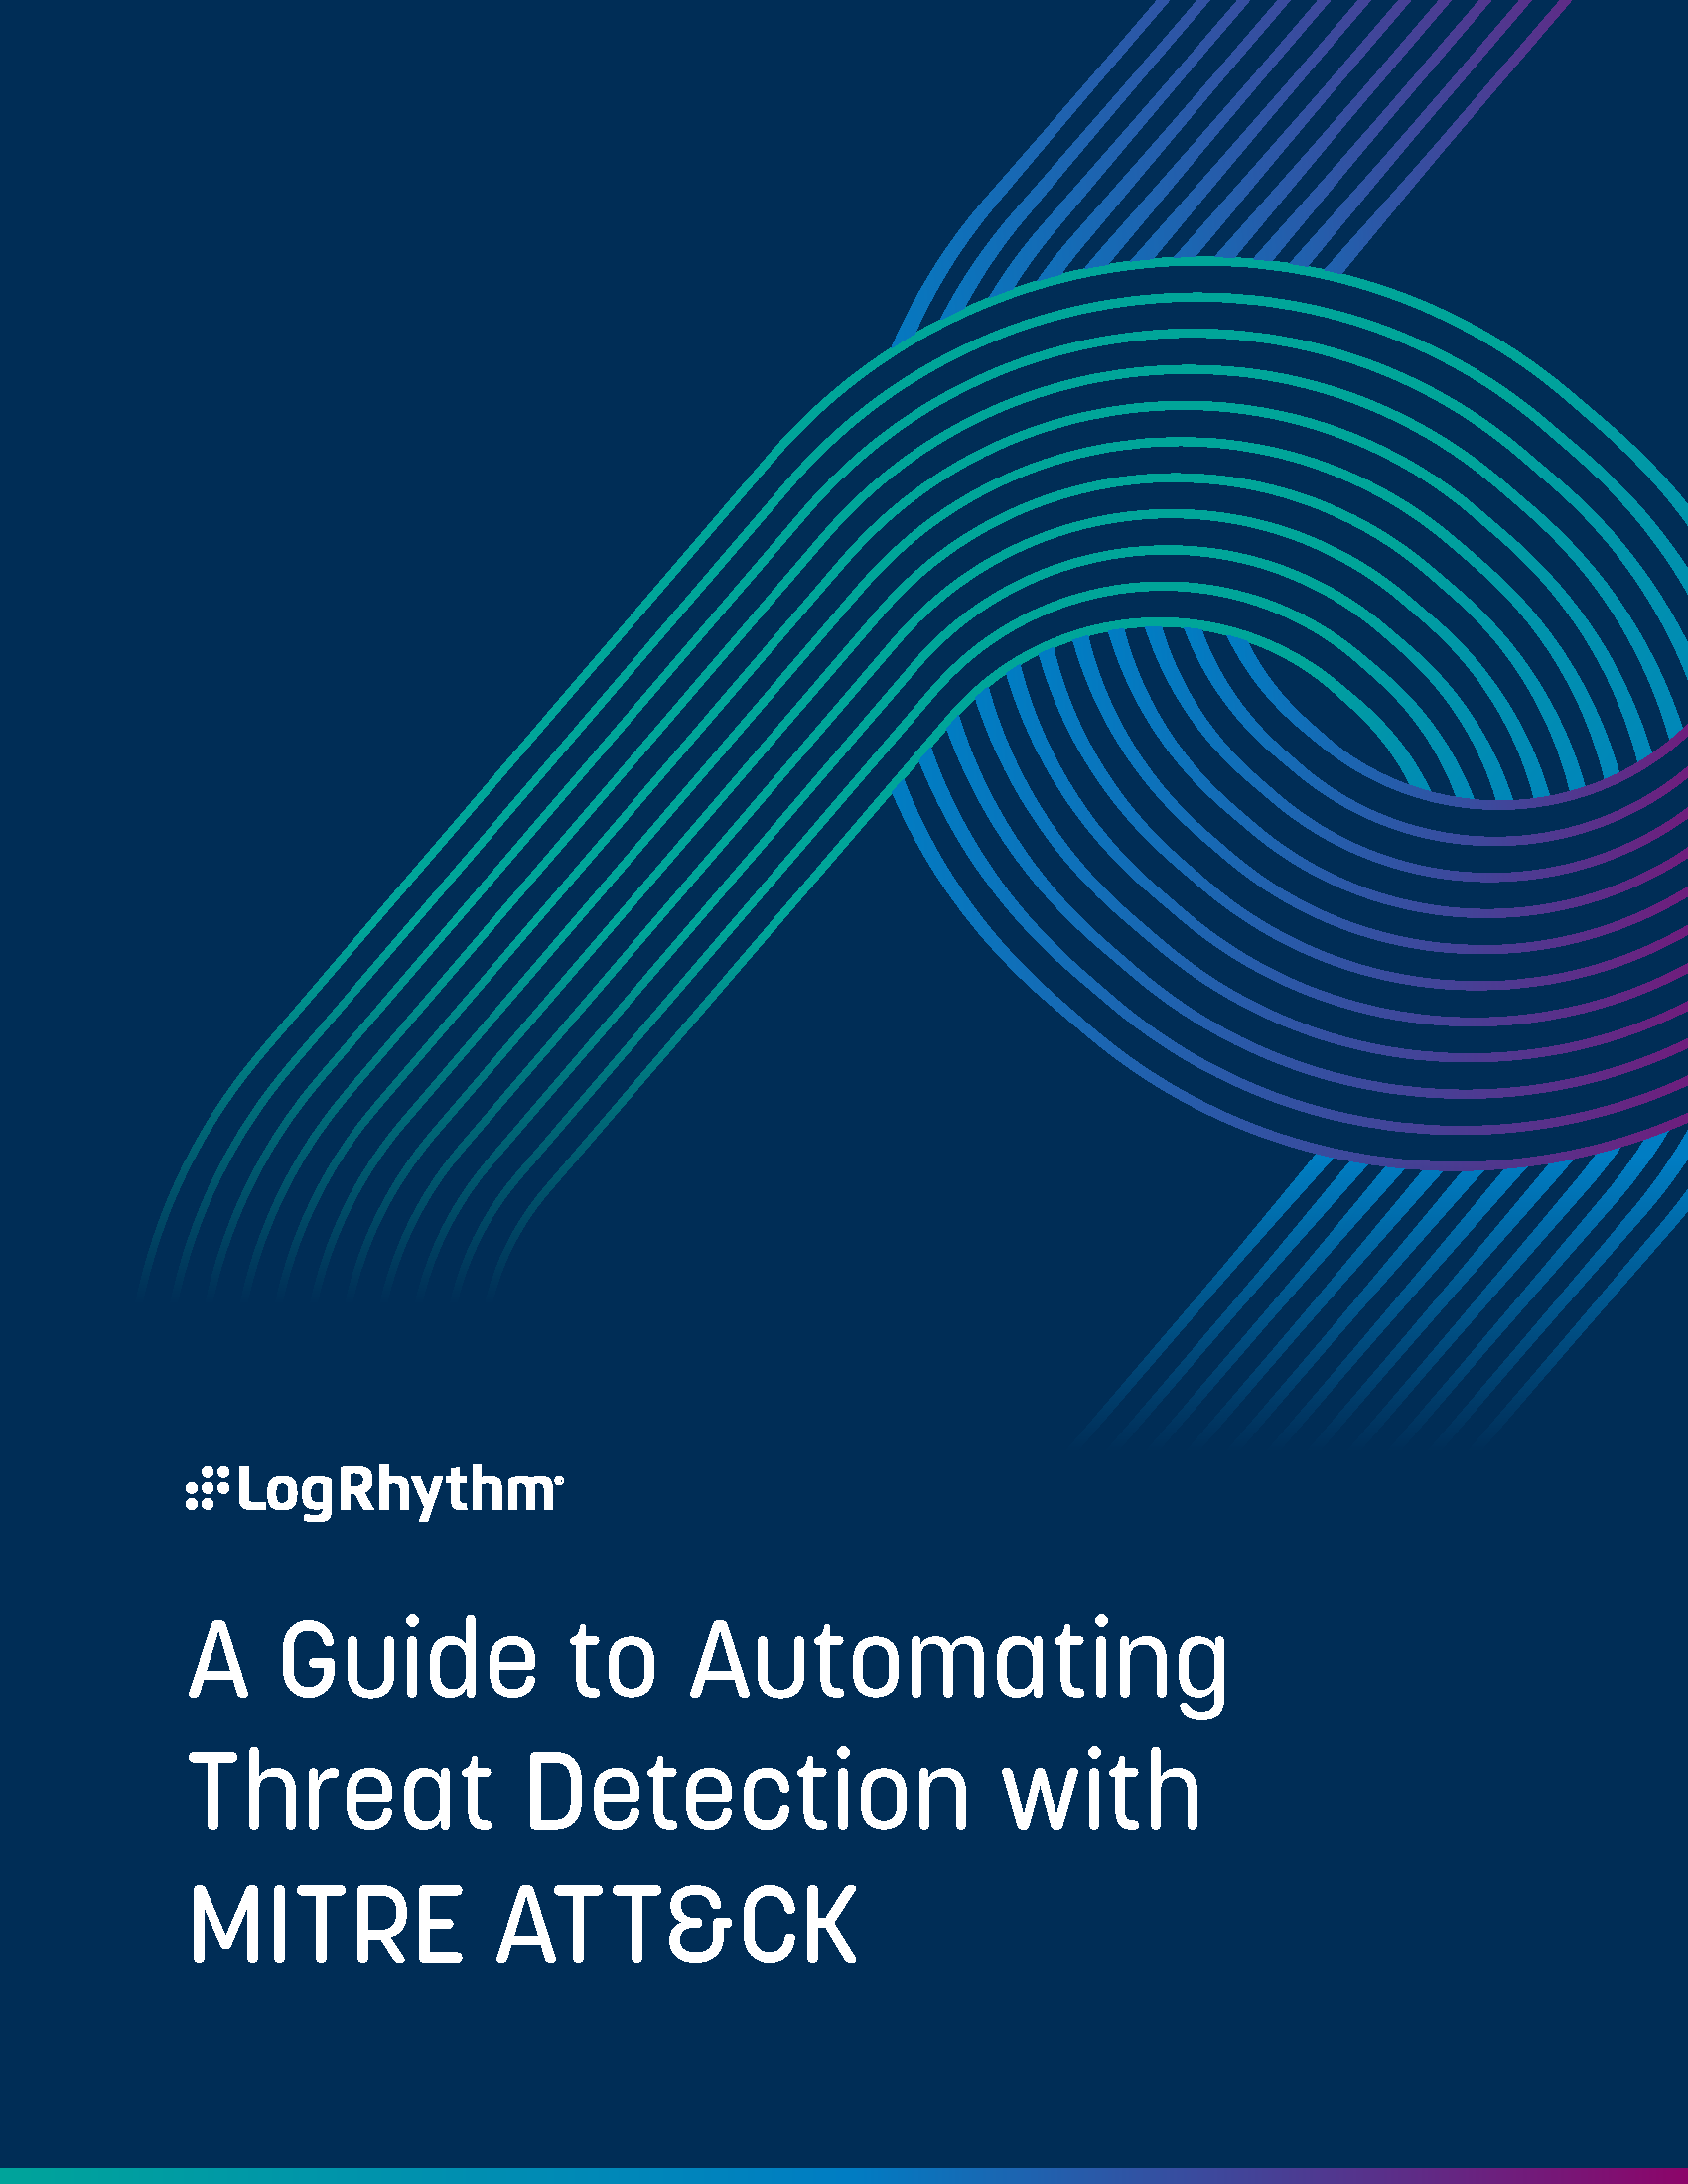 Pages from a-guide-to-automating-threat-detection-with-mitre-att&ck